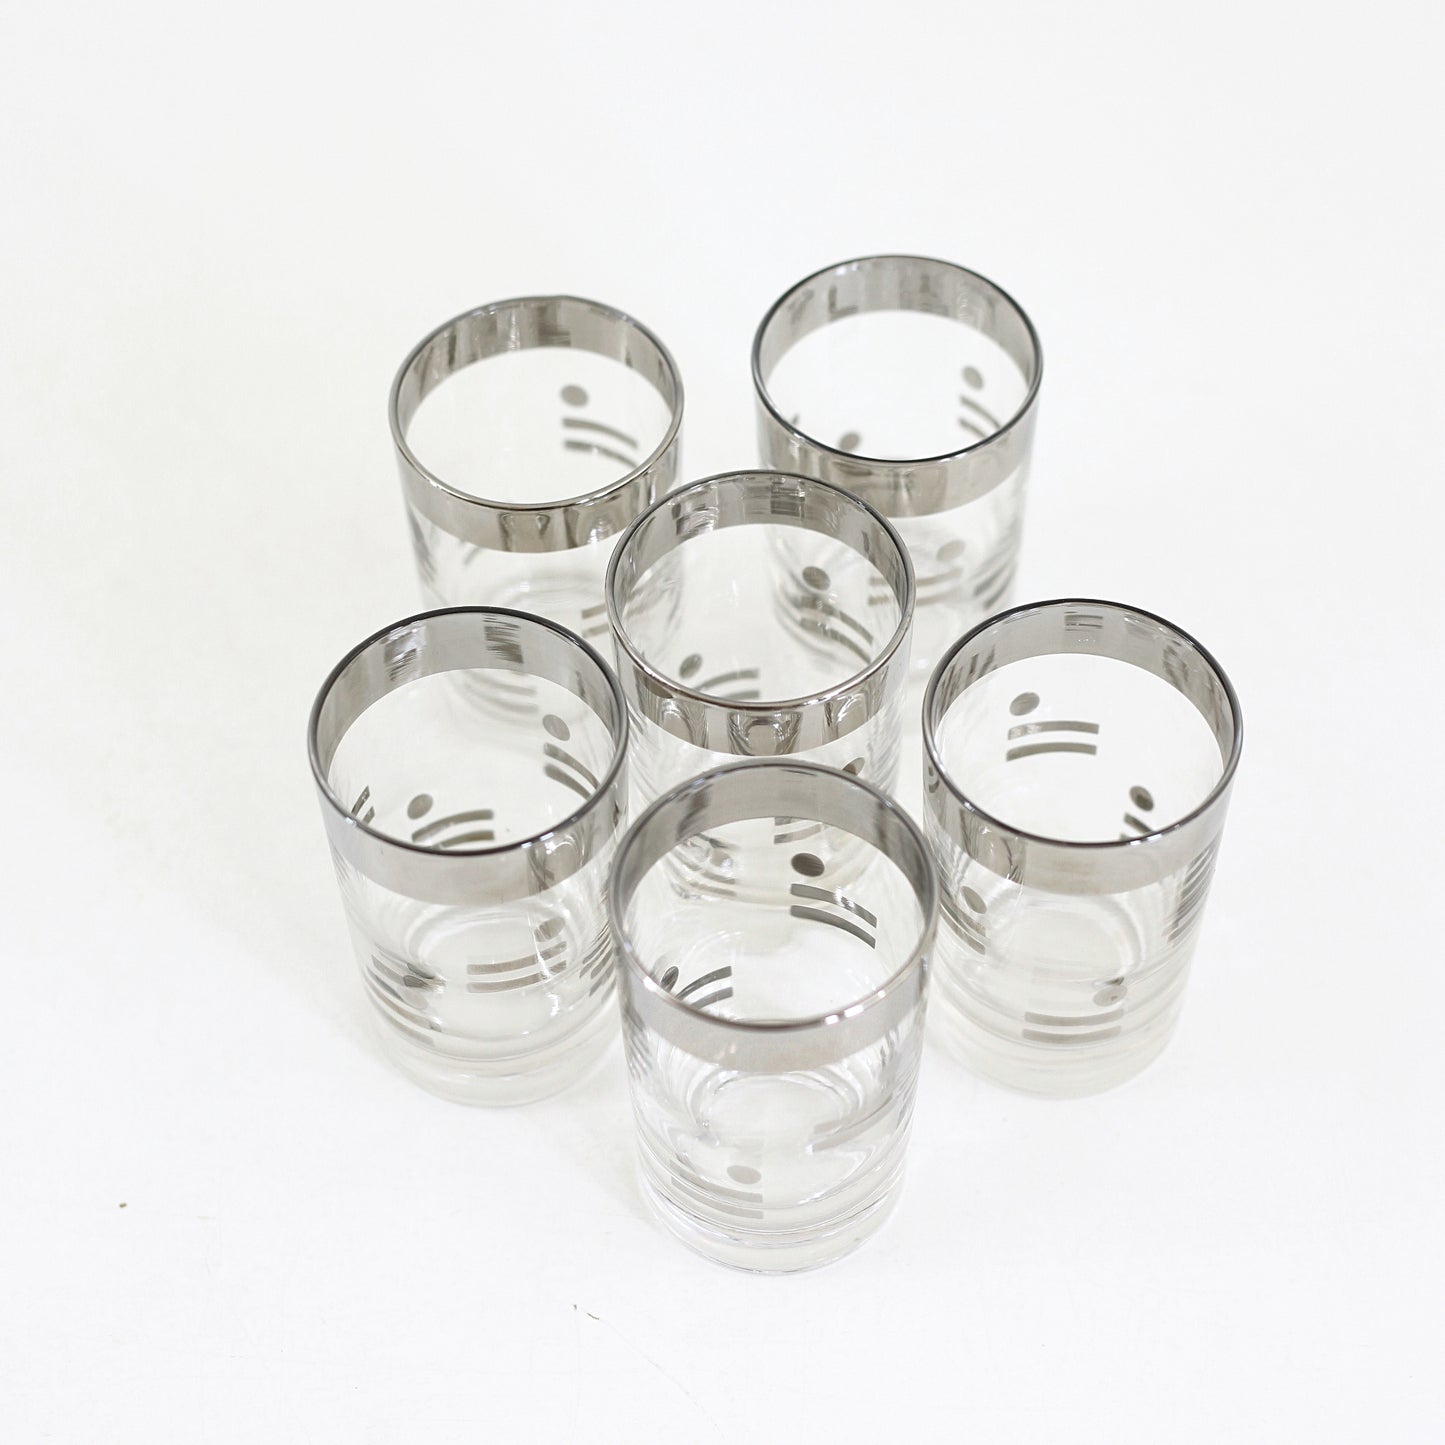 SOLD - Mid Century Silver Dots & Dashes Cocktail Glasses